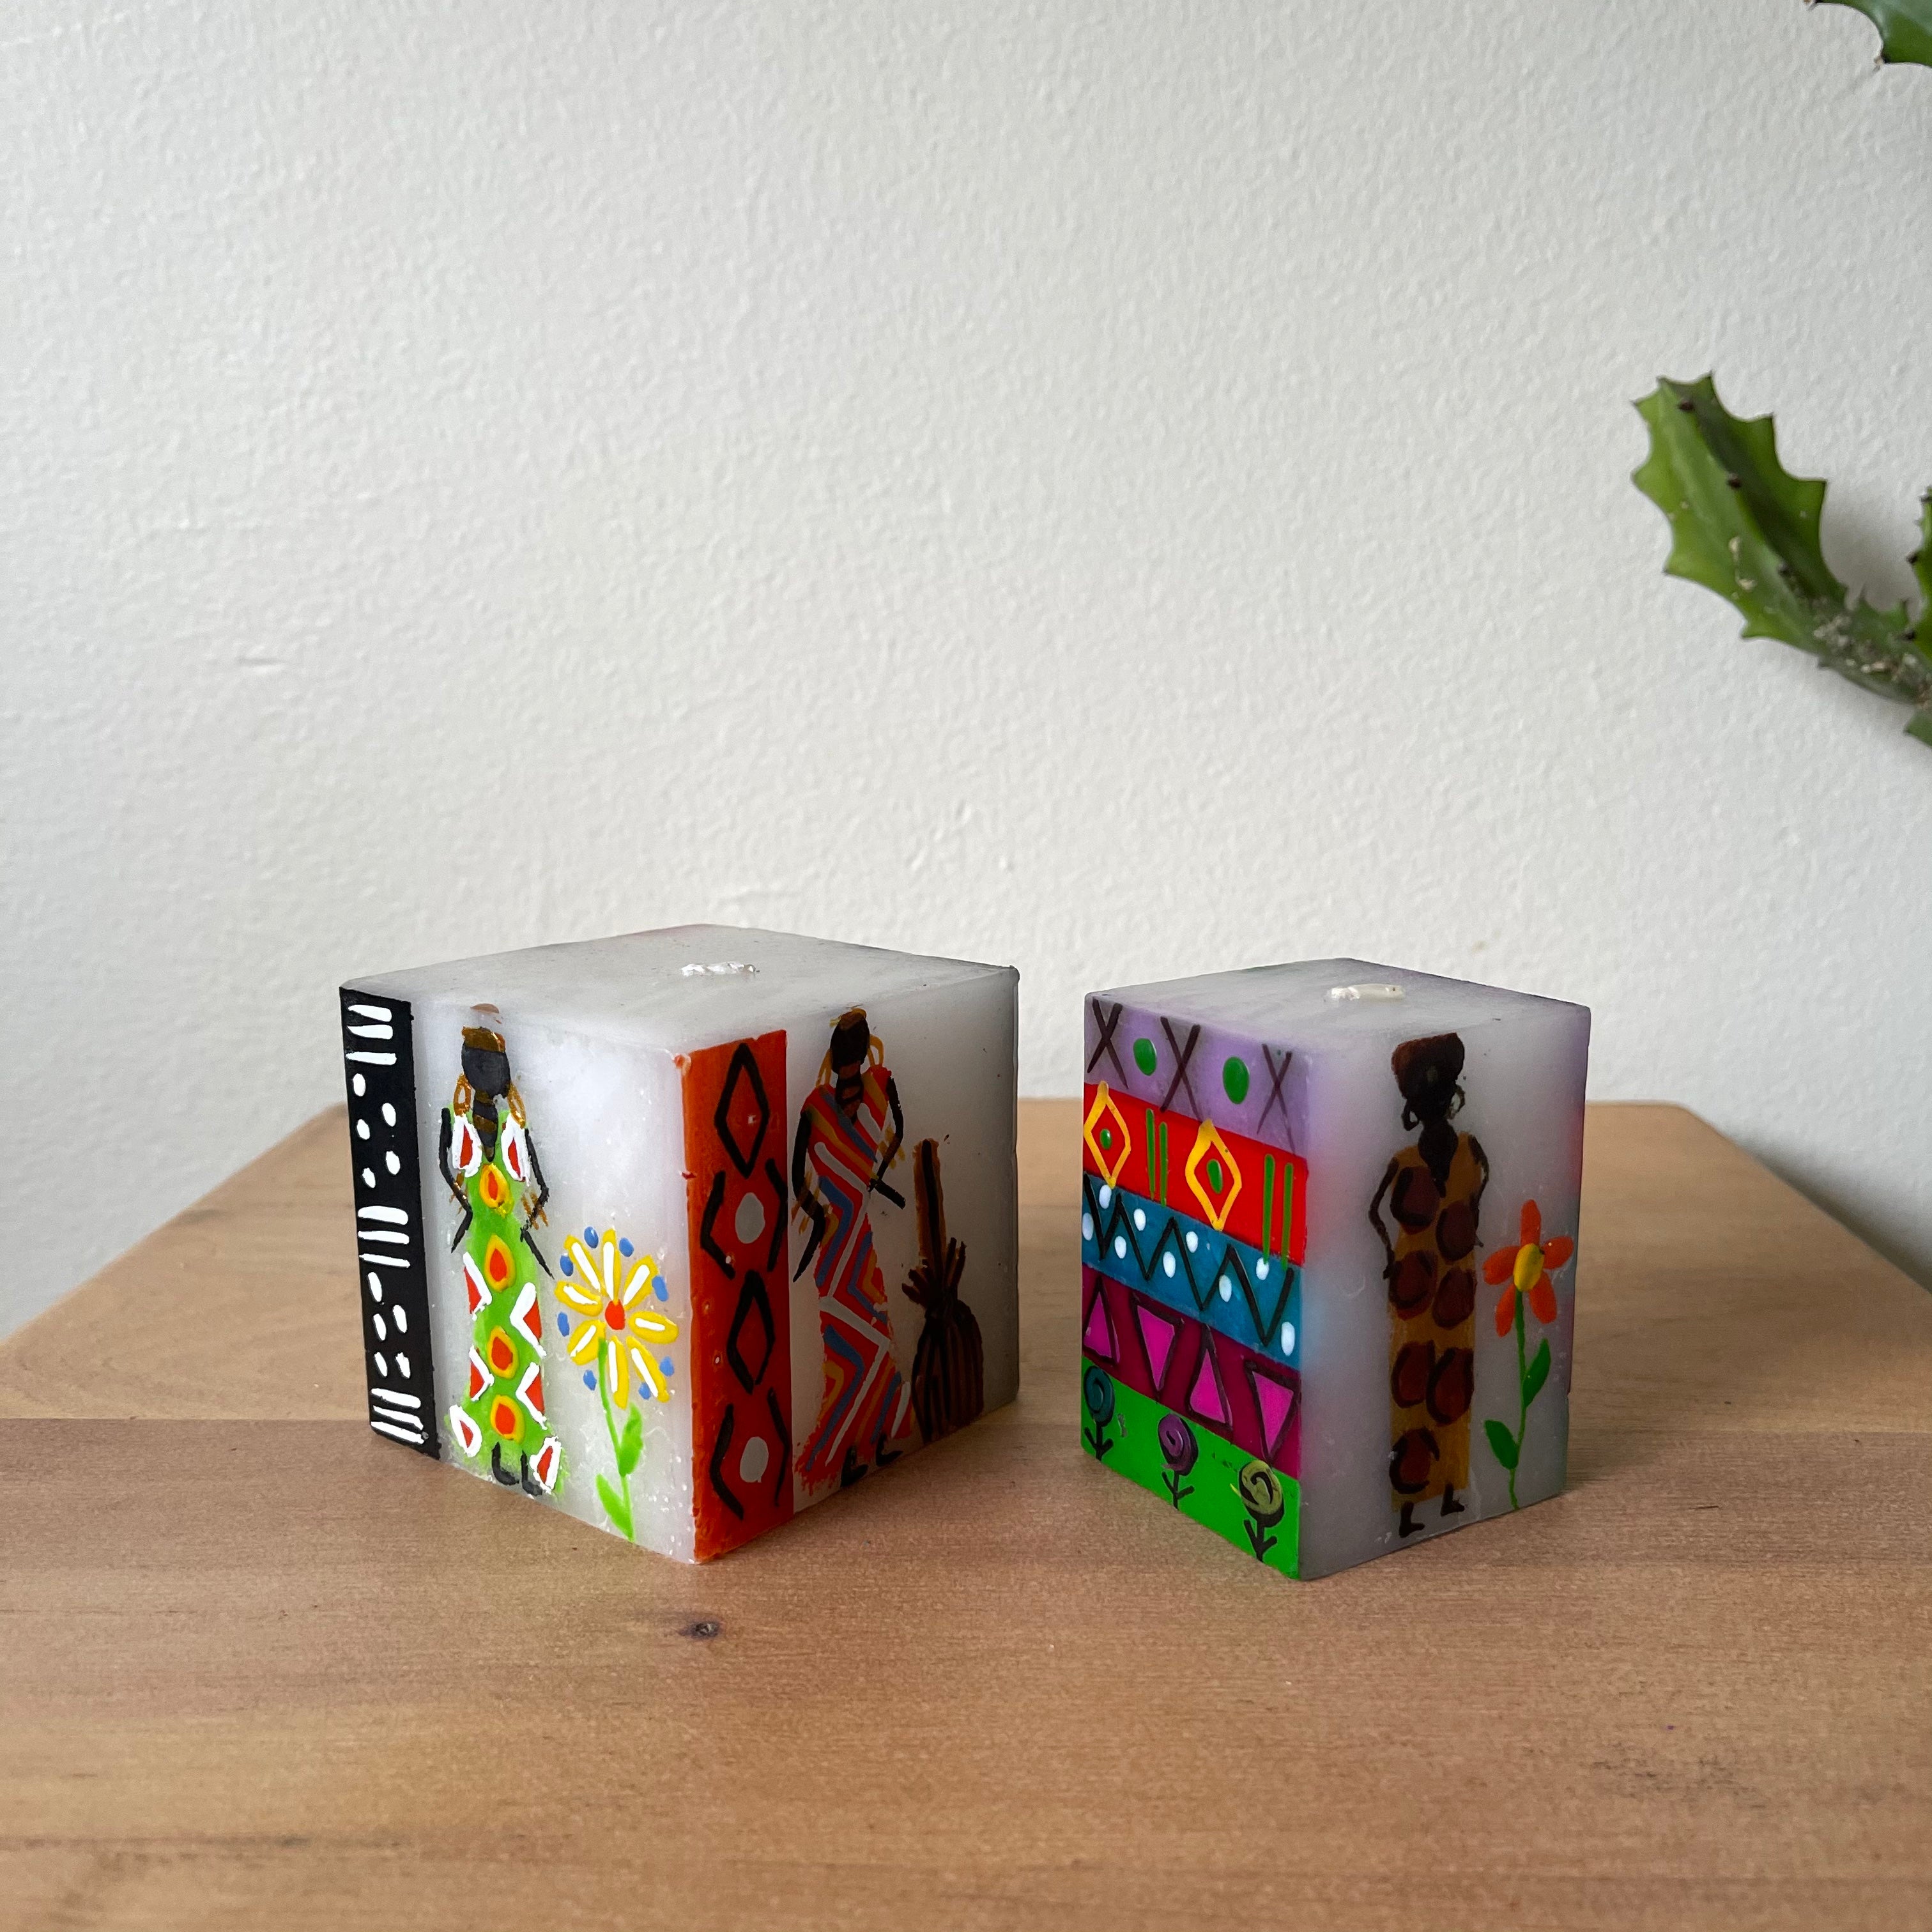 Two African Ladies cubes, 3x3x3 and 2x2x3.  Colorful design with whimsy African Lady painted on the side.